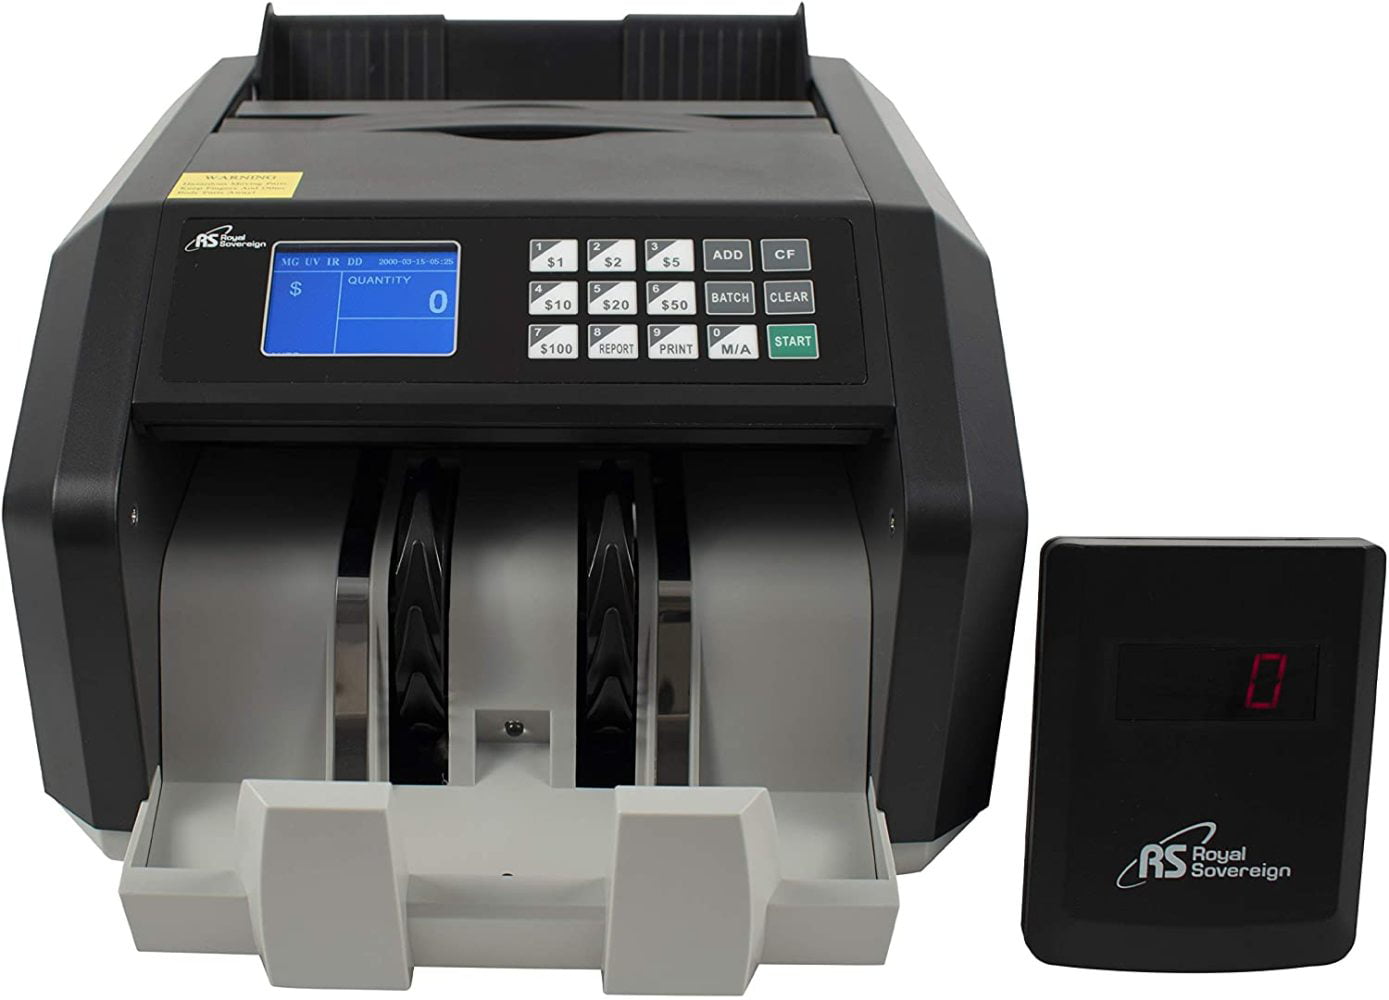 Royal Sovereign Money Counting Machine Counterfeit Detector Rbc-es250 12c for sale online 